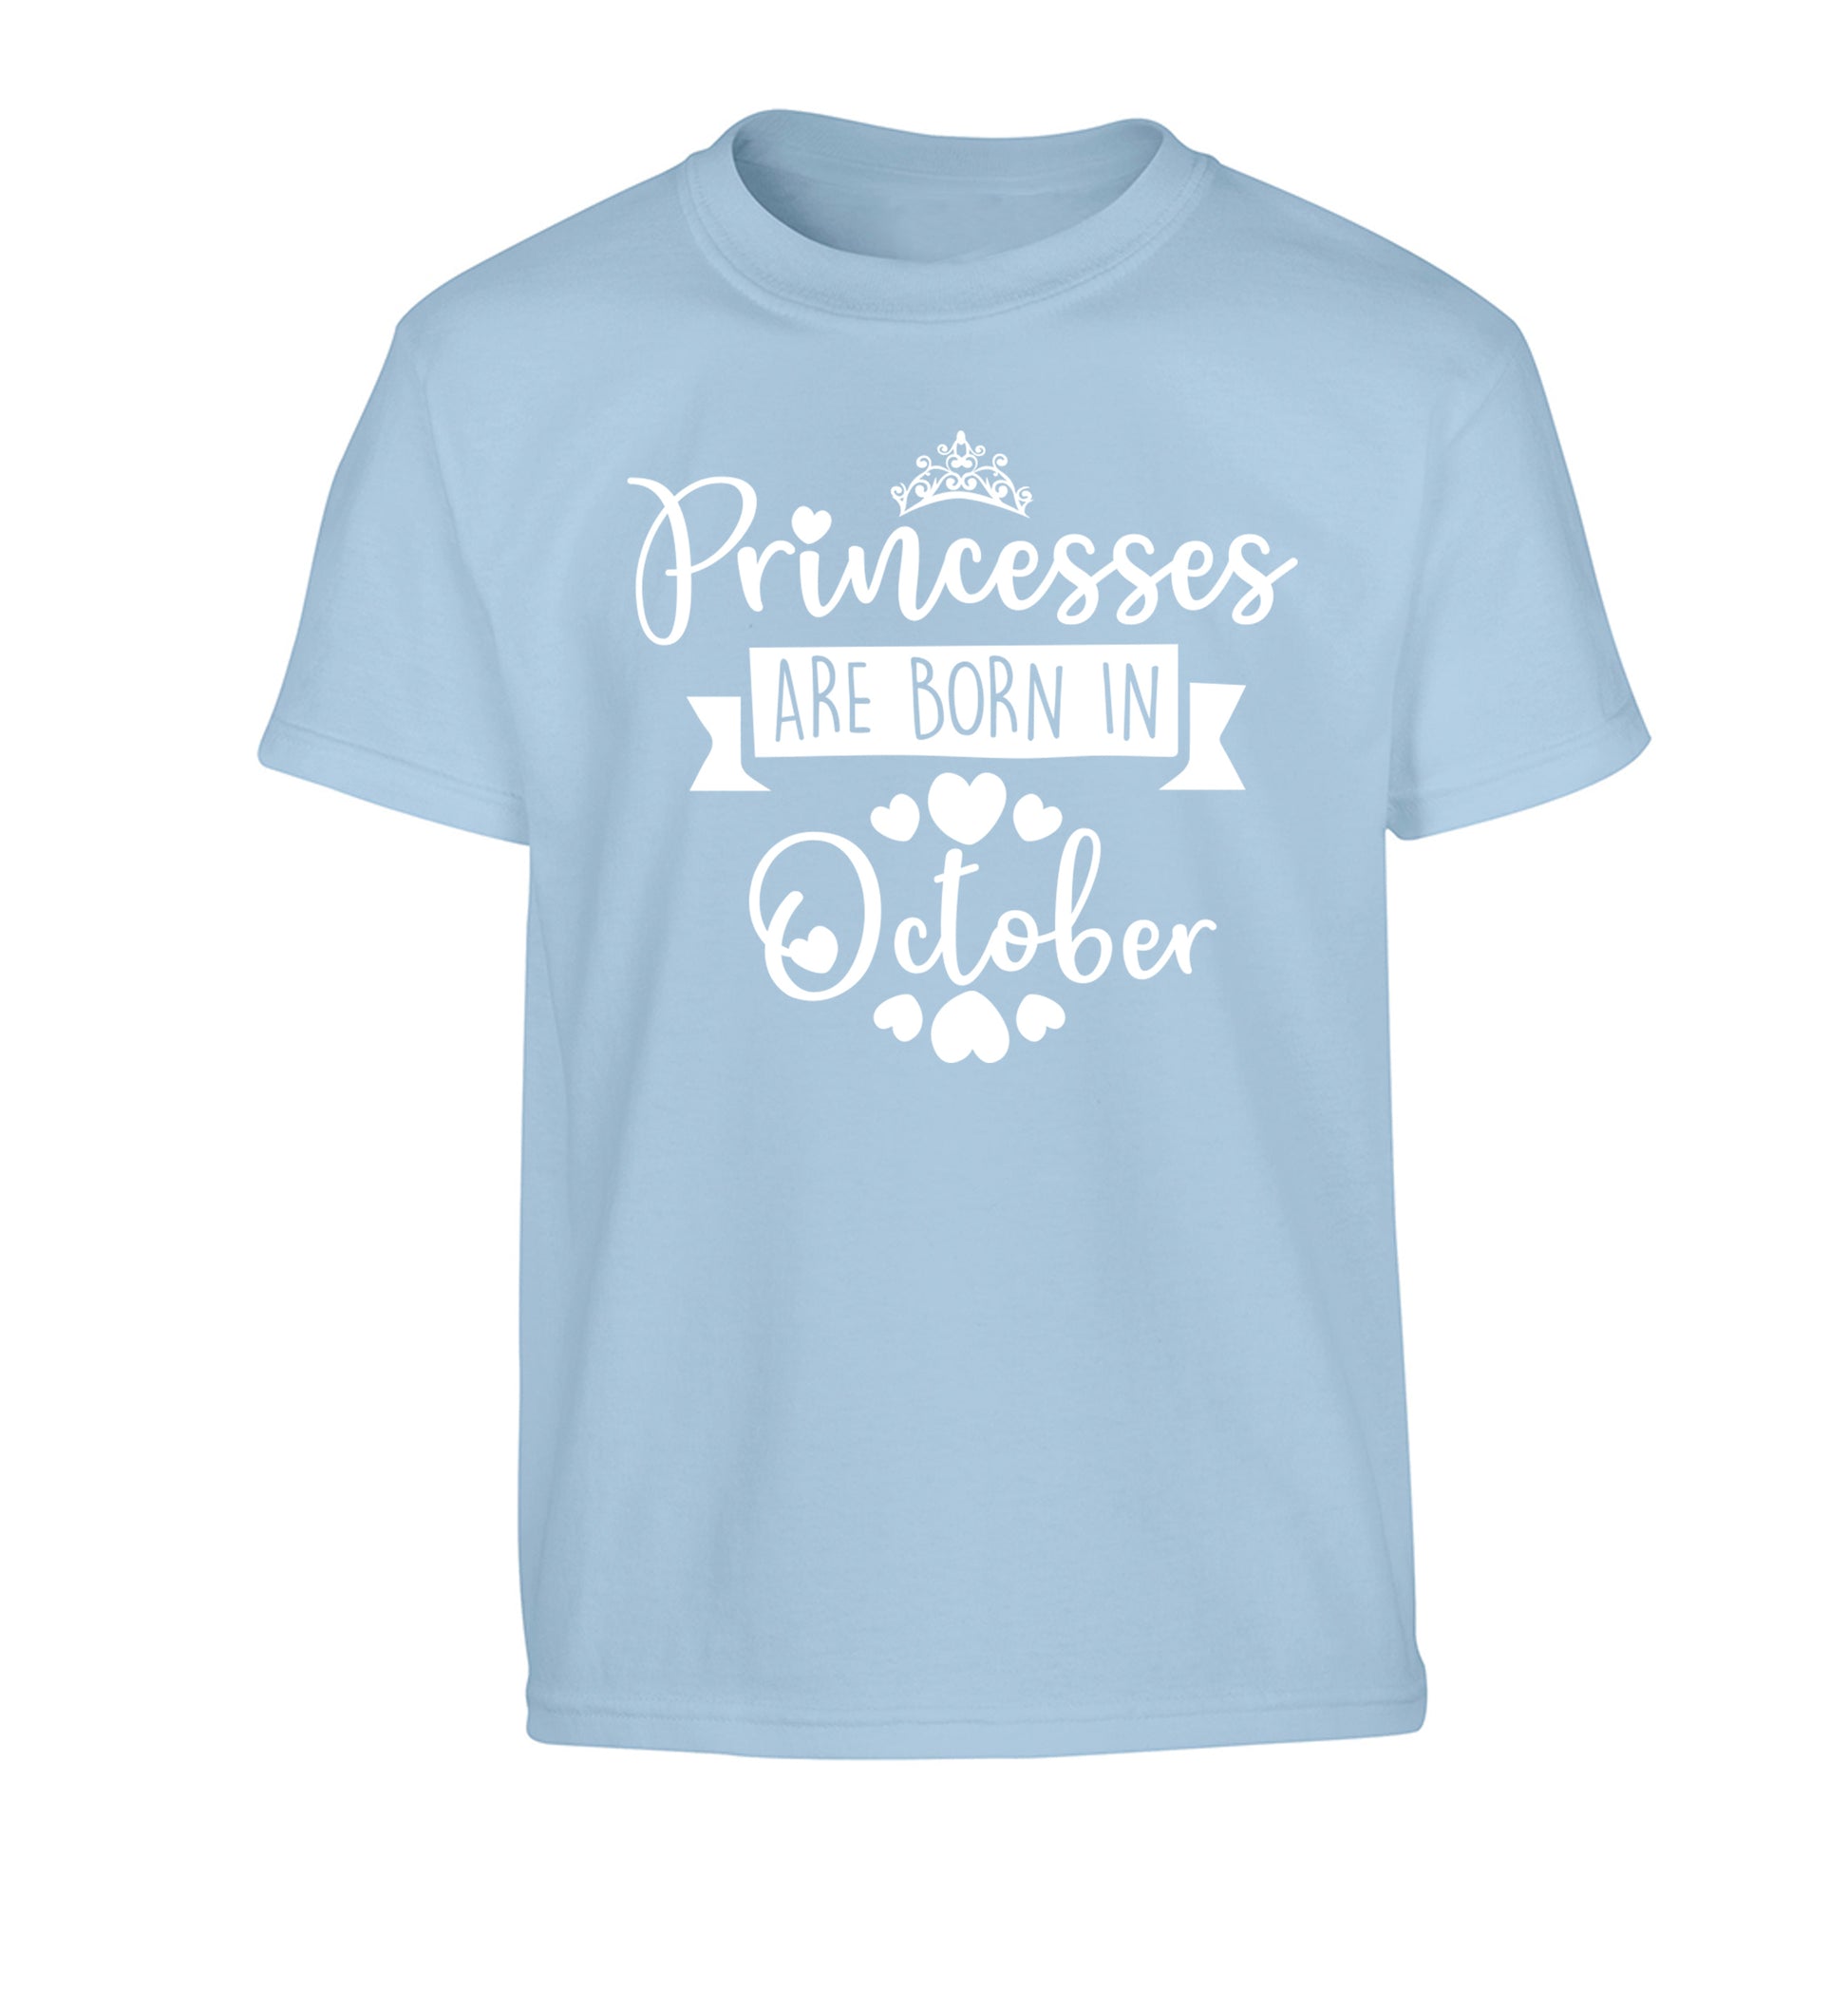 Princesses are born in October Children's light blue Tshirt 12-13 Years